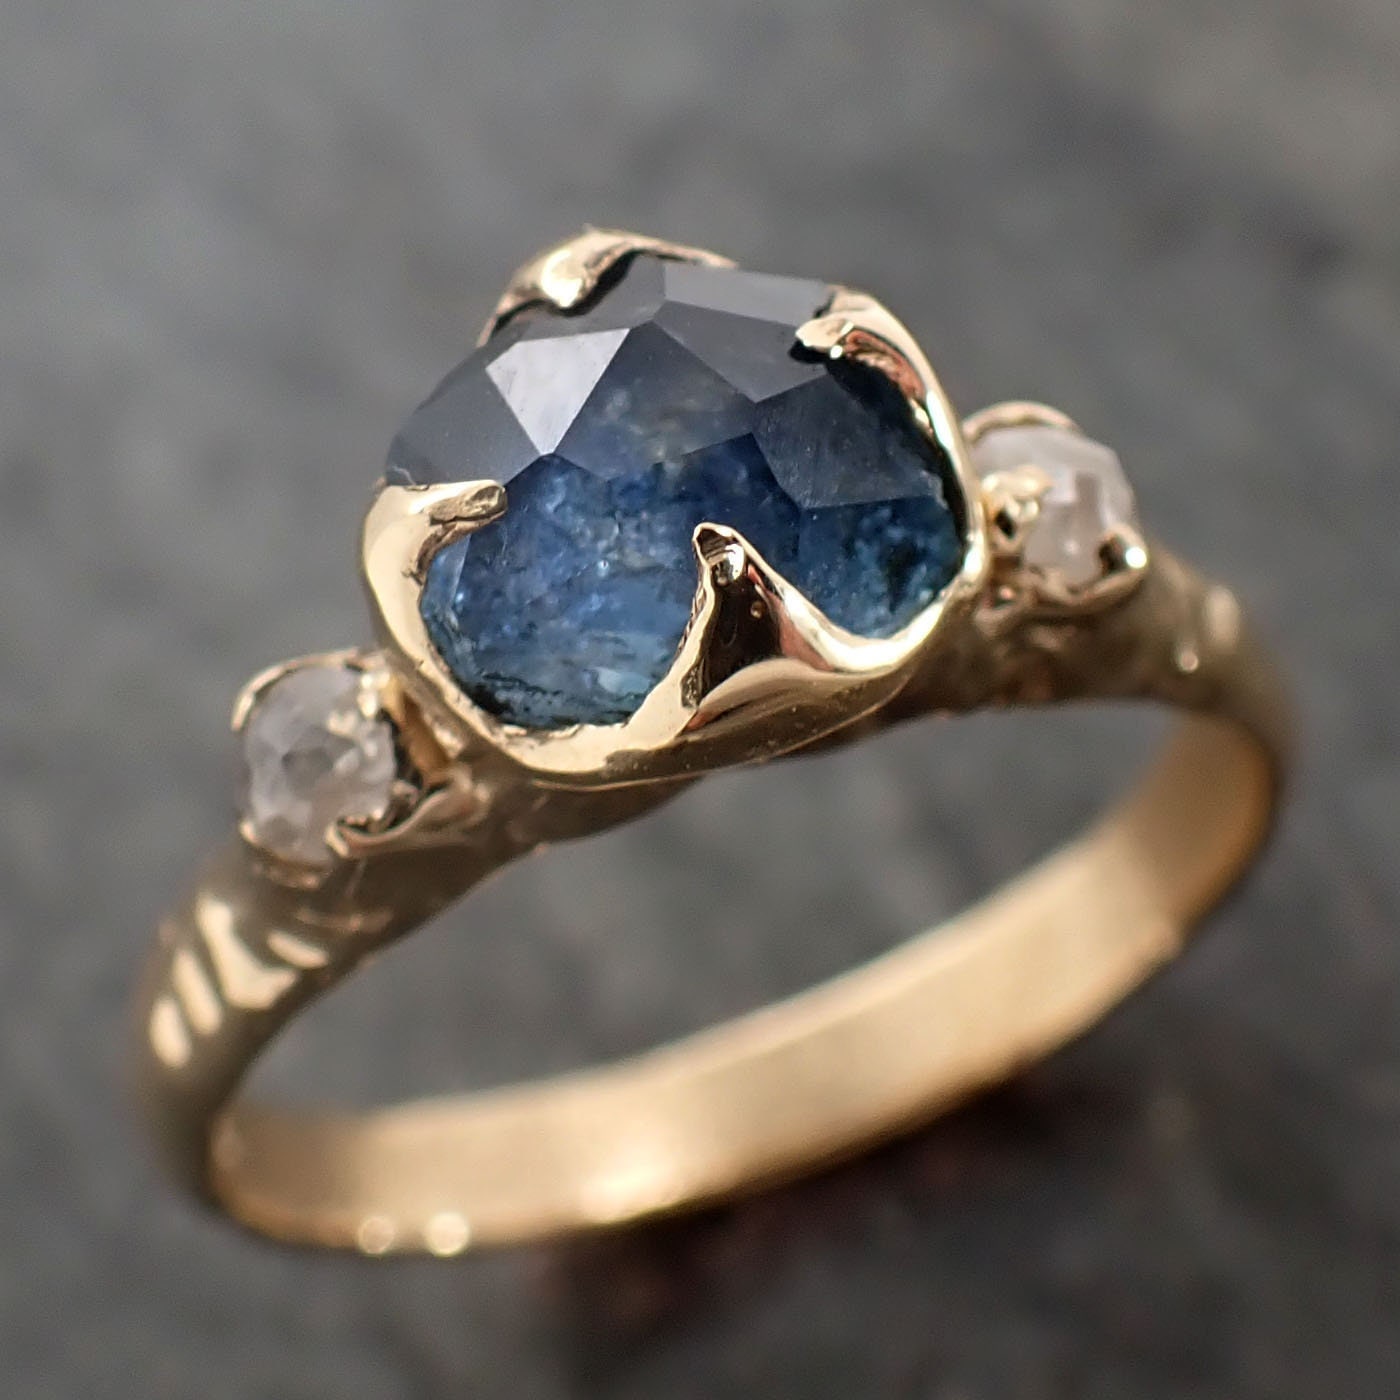 Partially faceted blue Montana Sapphire and fancy Diamonds 18k Yellow Gold Engagement Wedding Ring Gemstone Ring Multi stone Ring 2985